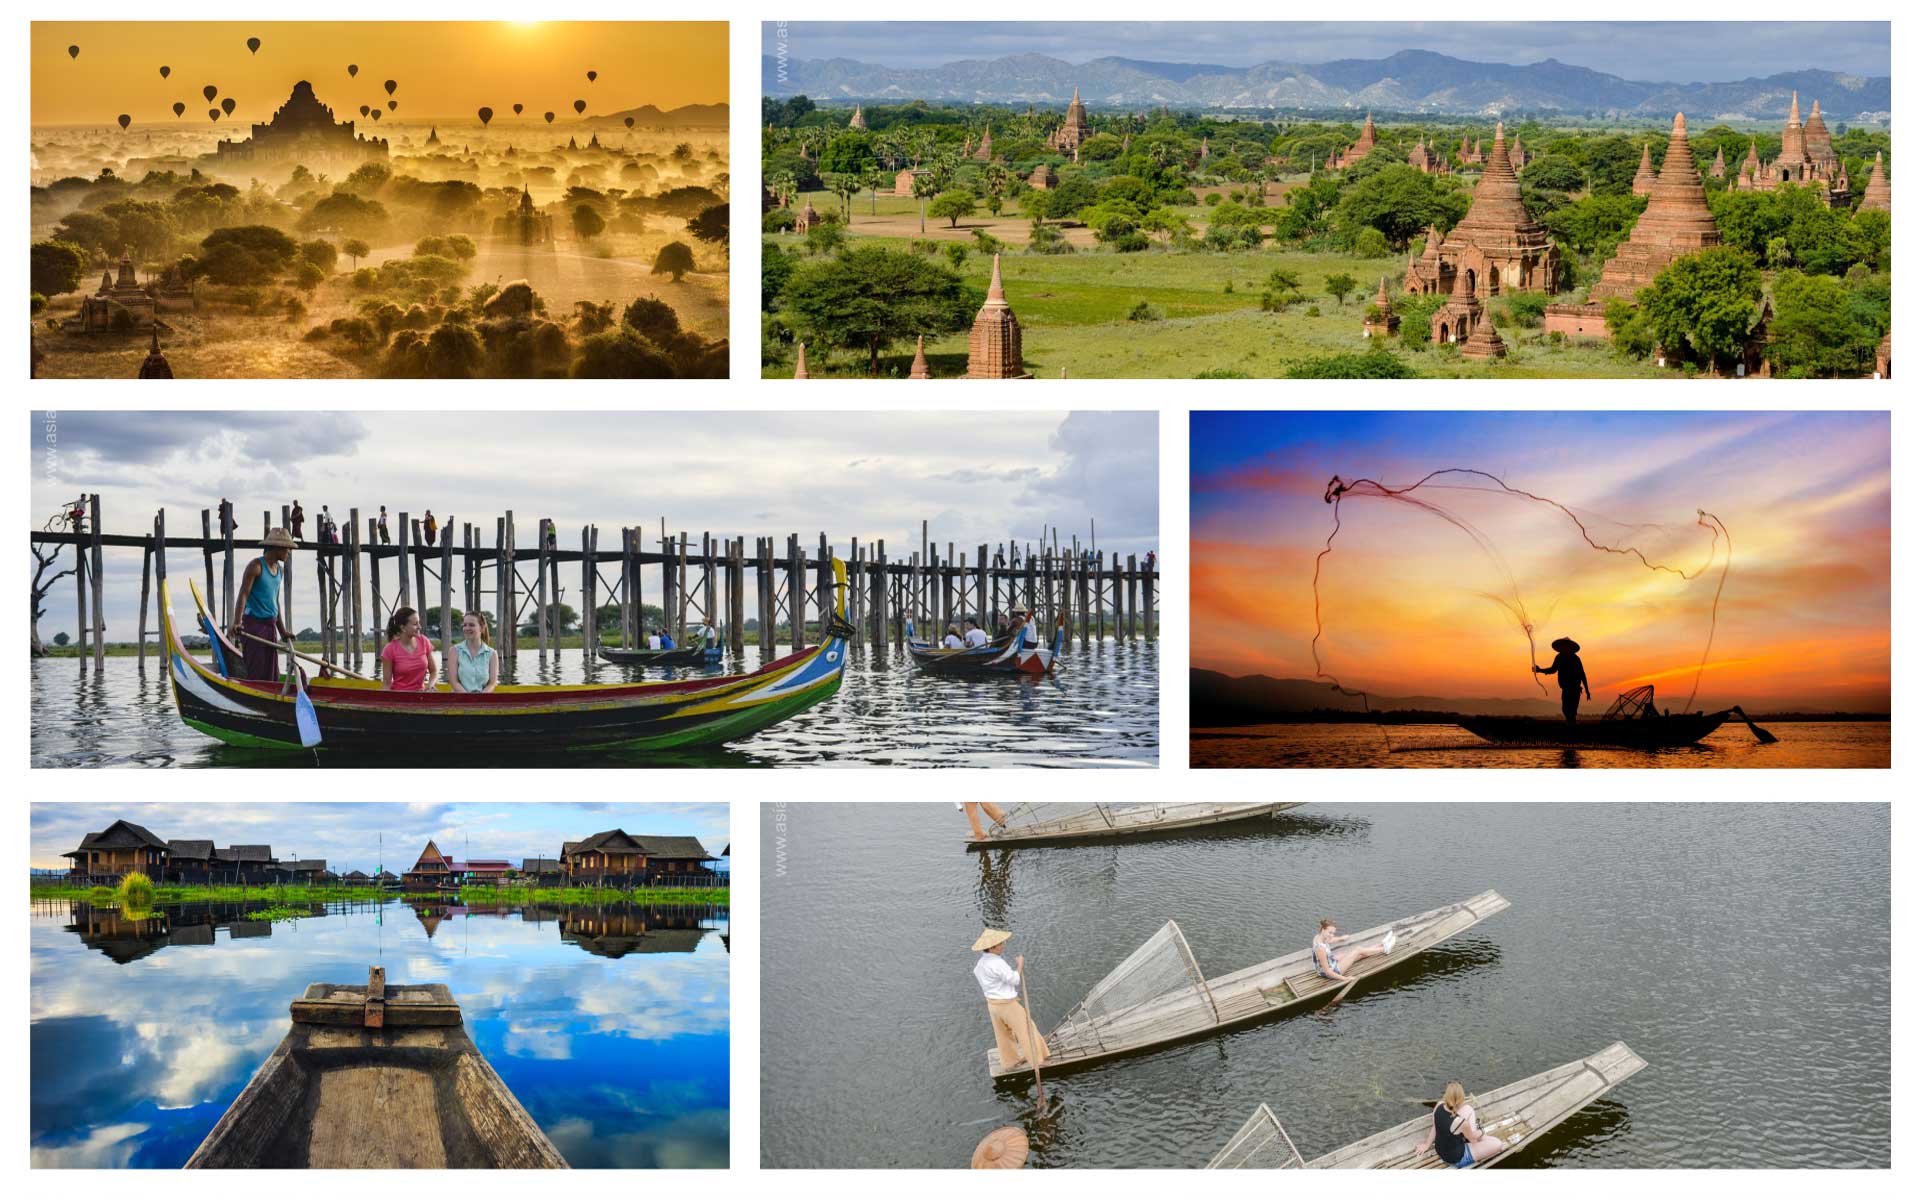 Myanmar tour packages from Australia 221d6